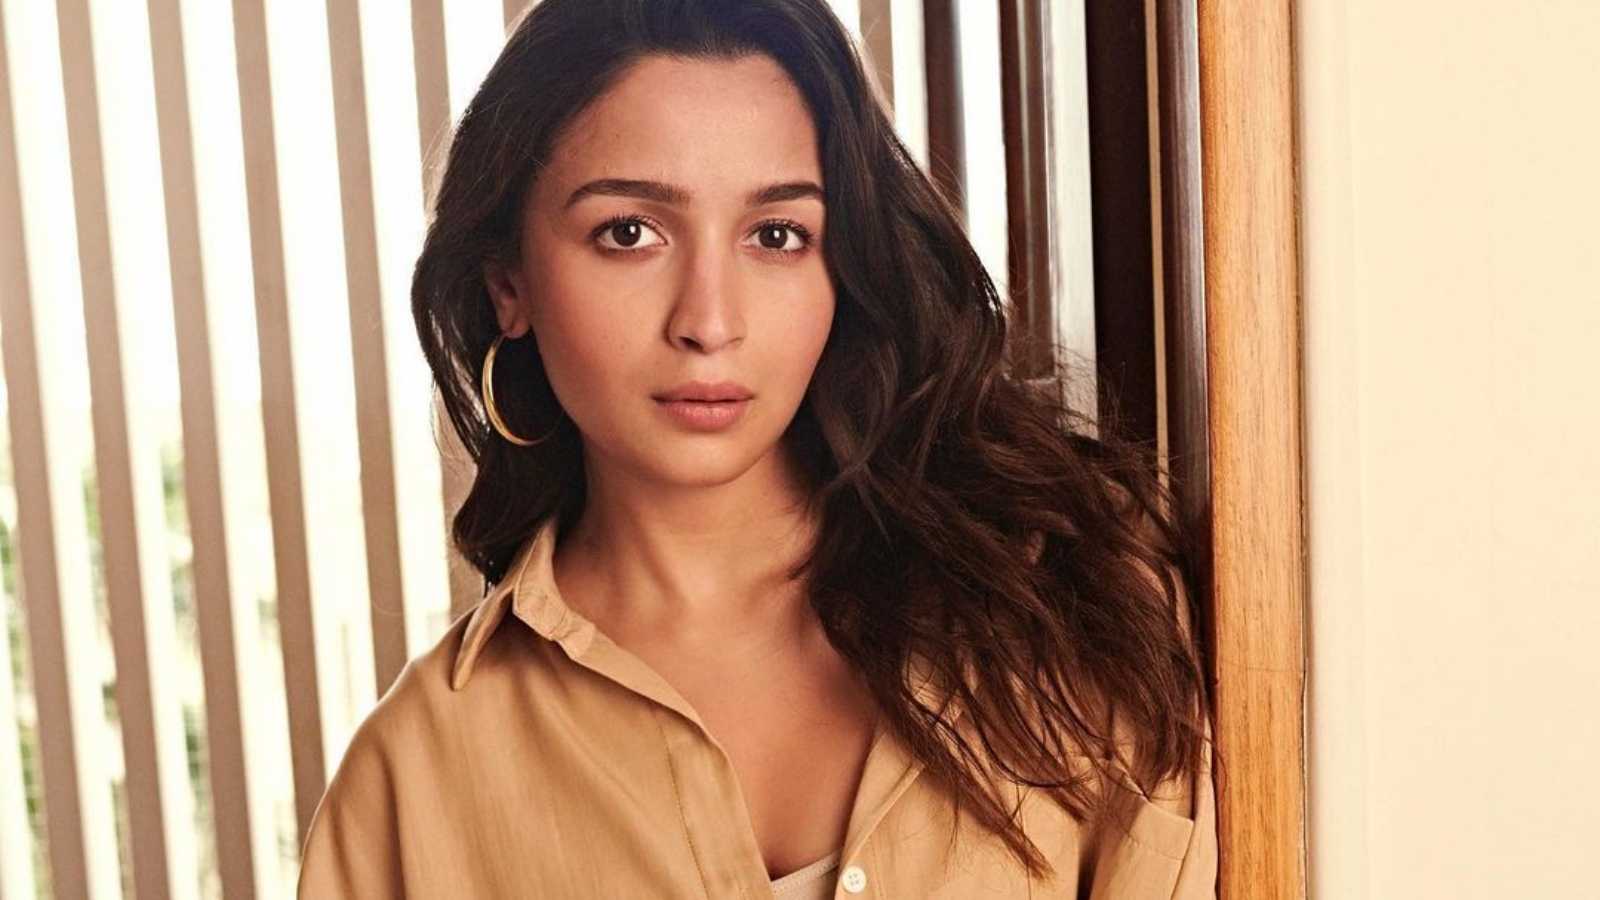 Pregnant Alia Bhatt celebrates getting into IIT, here's what happened when she finally got there